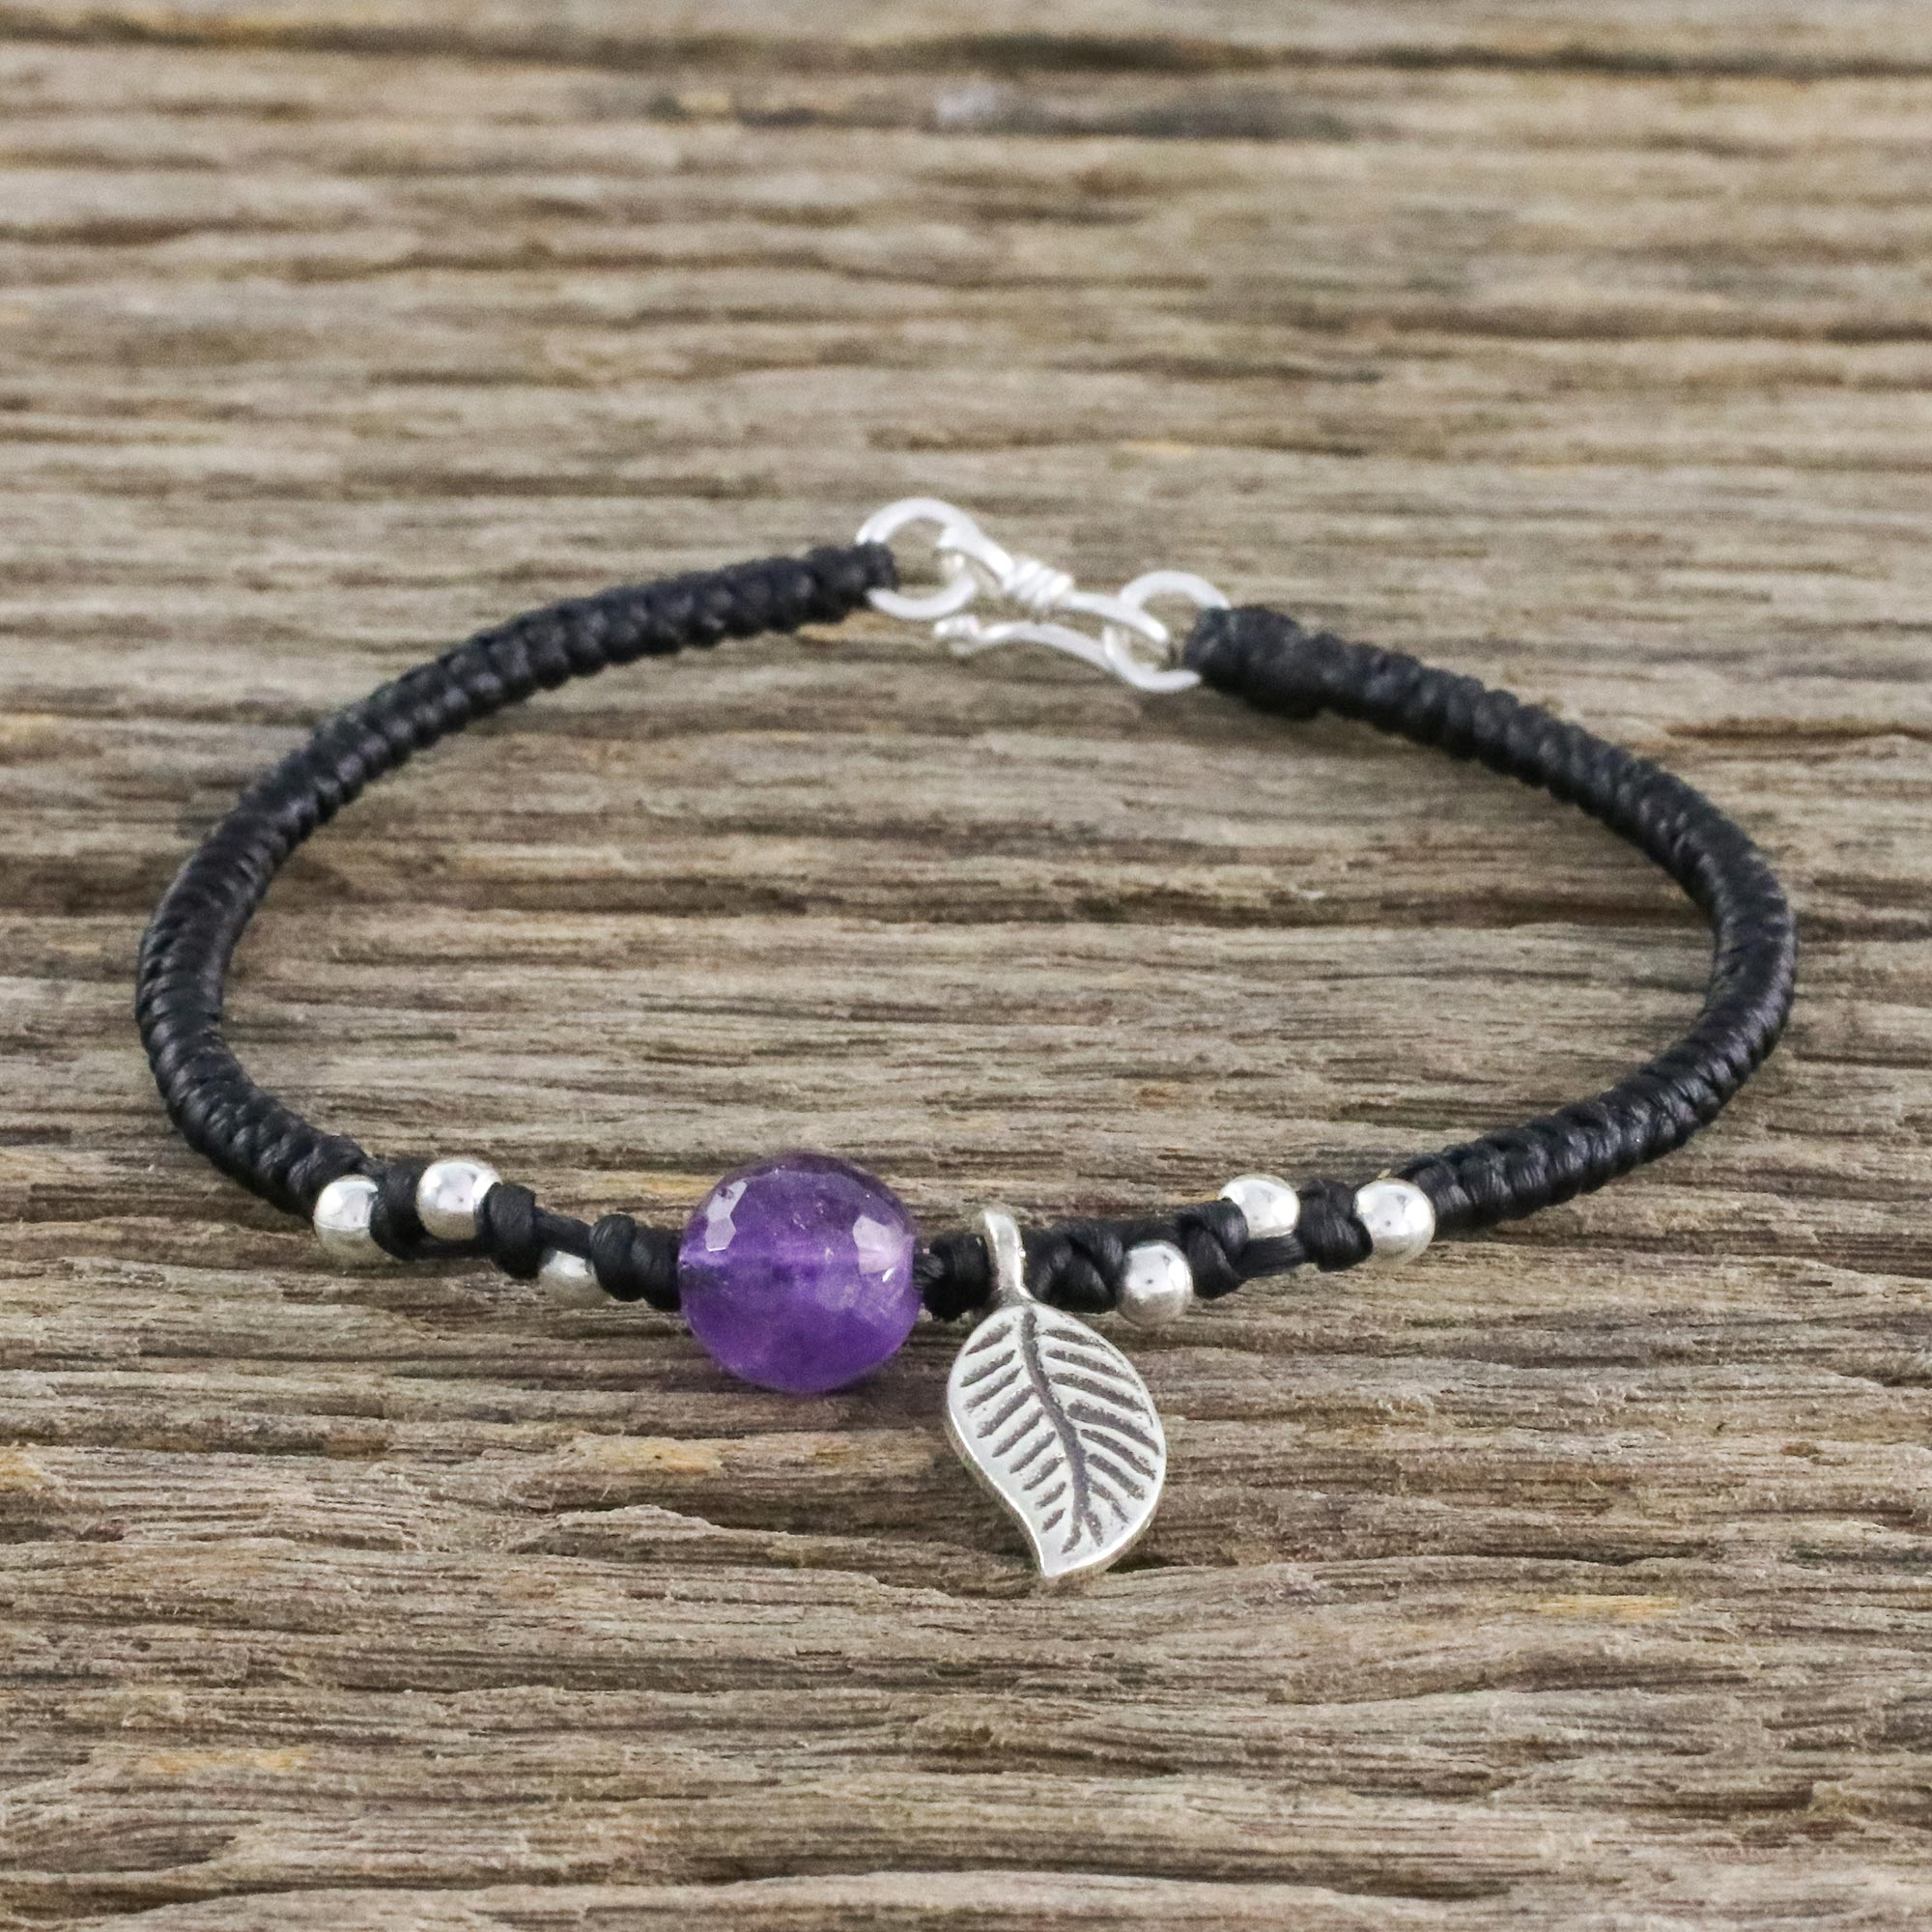 Buy Negativity Protector Amethyst Miracle Bracelet Online From Premium  Crystal Store at Best Price - The Miracle Hub